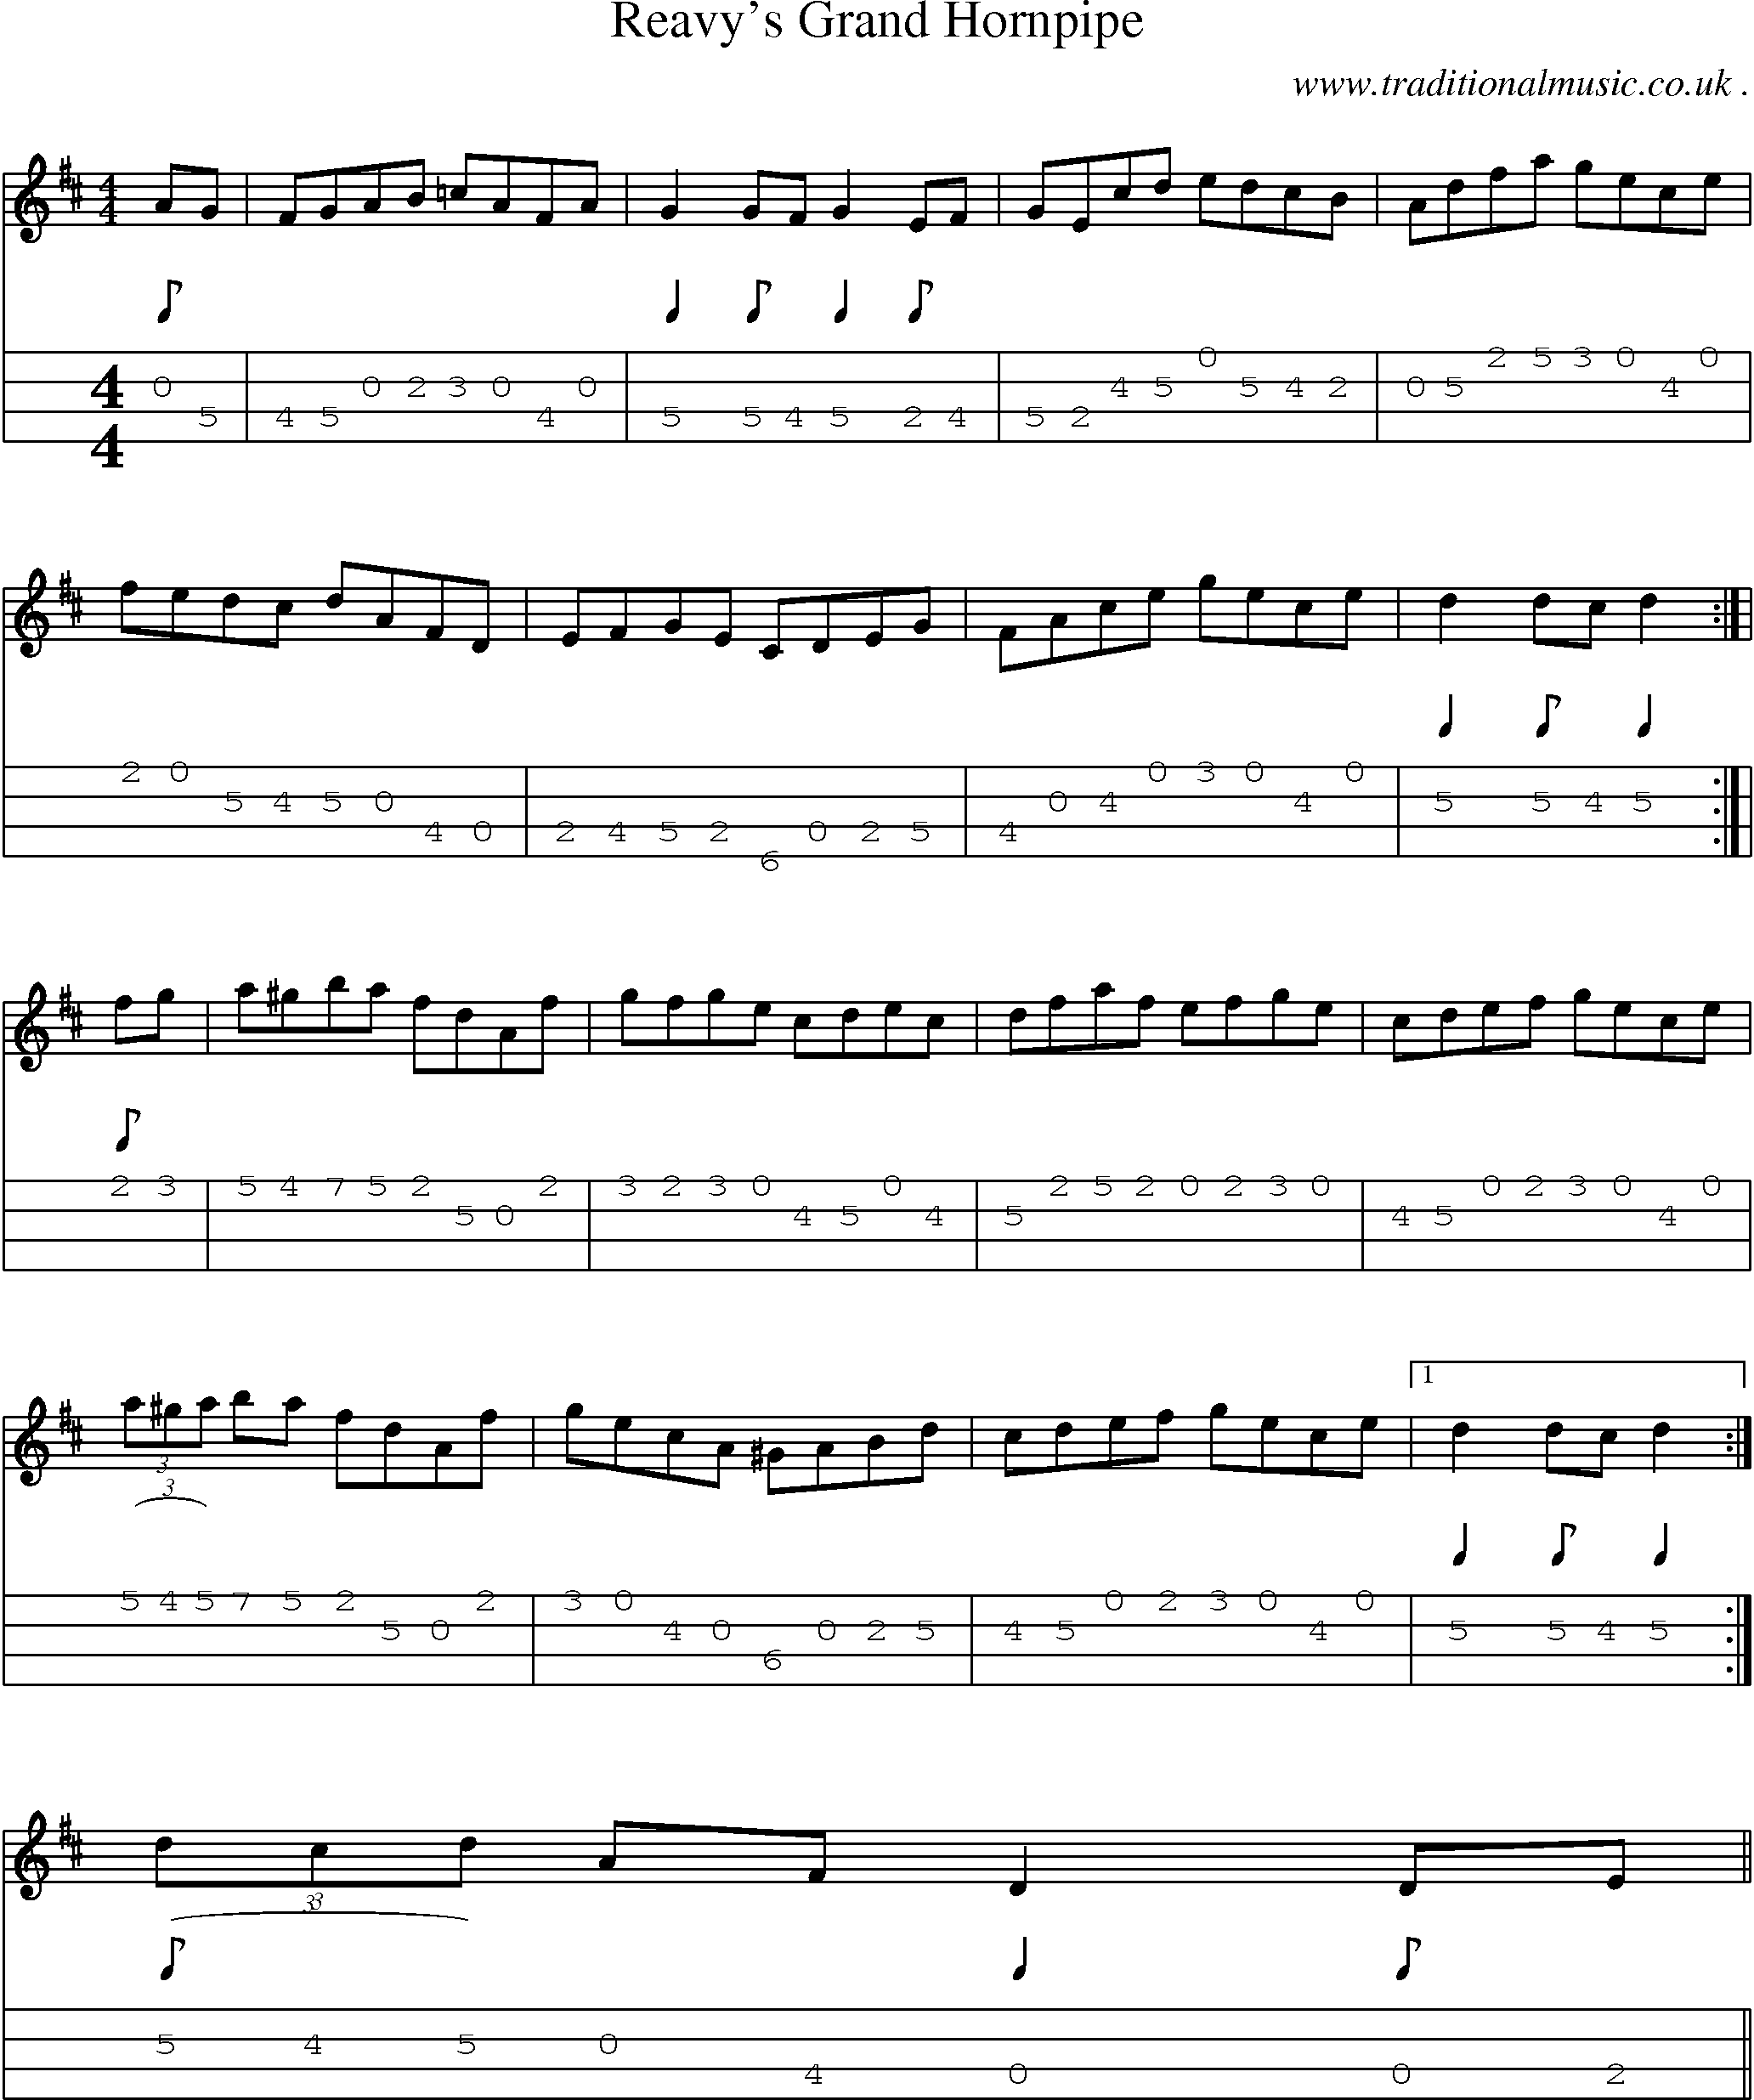 Sheet-Music and Mandolin Tabs for Reavys Grand Hornpipe